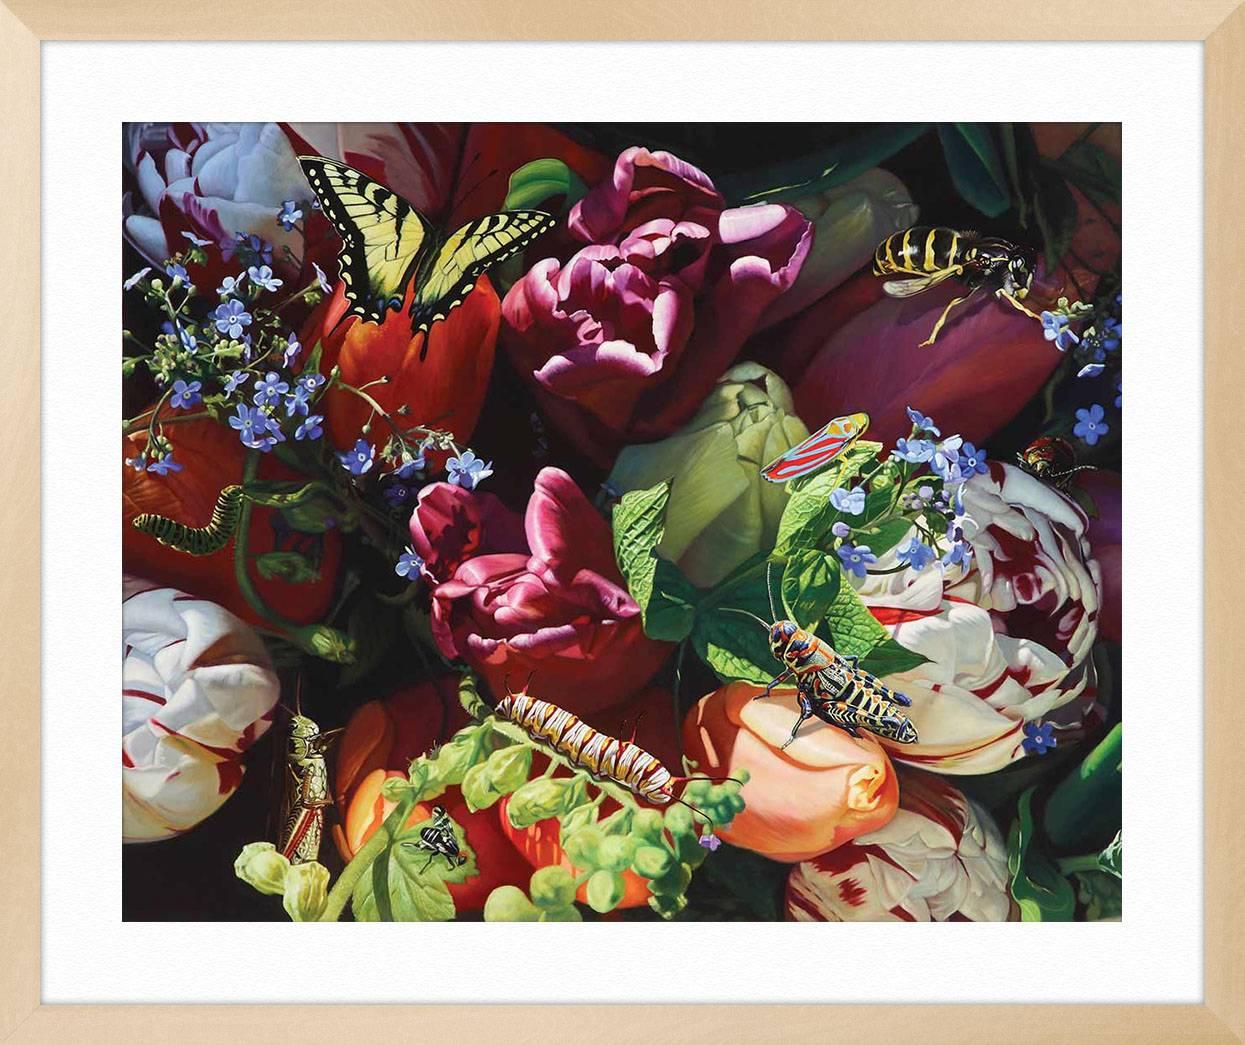 ABOUT THIS PIECE: Dennis is known for his hyper naturalistic, highly detailed and obsessively delineated paintings that explore the subversive potential of beauty and pleasure. Fresh and unconventional, The Exuberant Garden depicts a fantastically